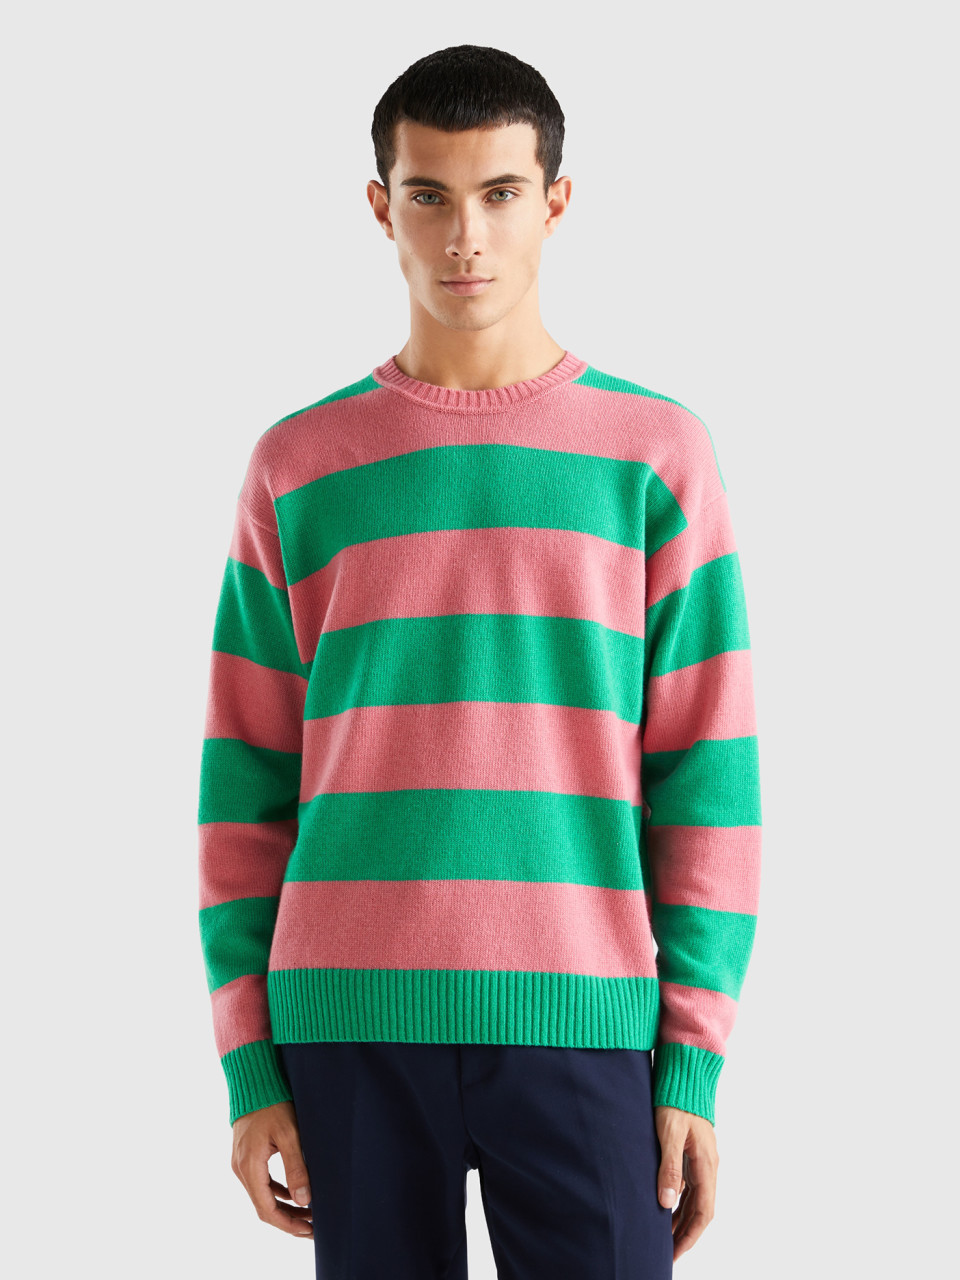 Benetton, Sweater With Two-tone Stripes, Pink, Men